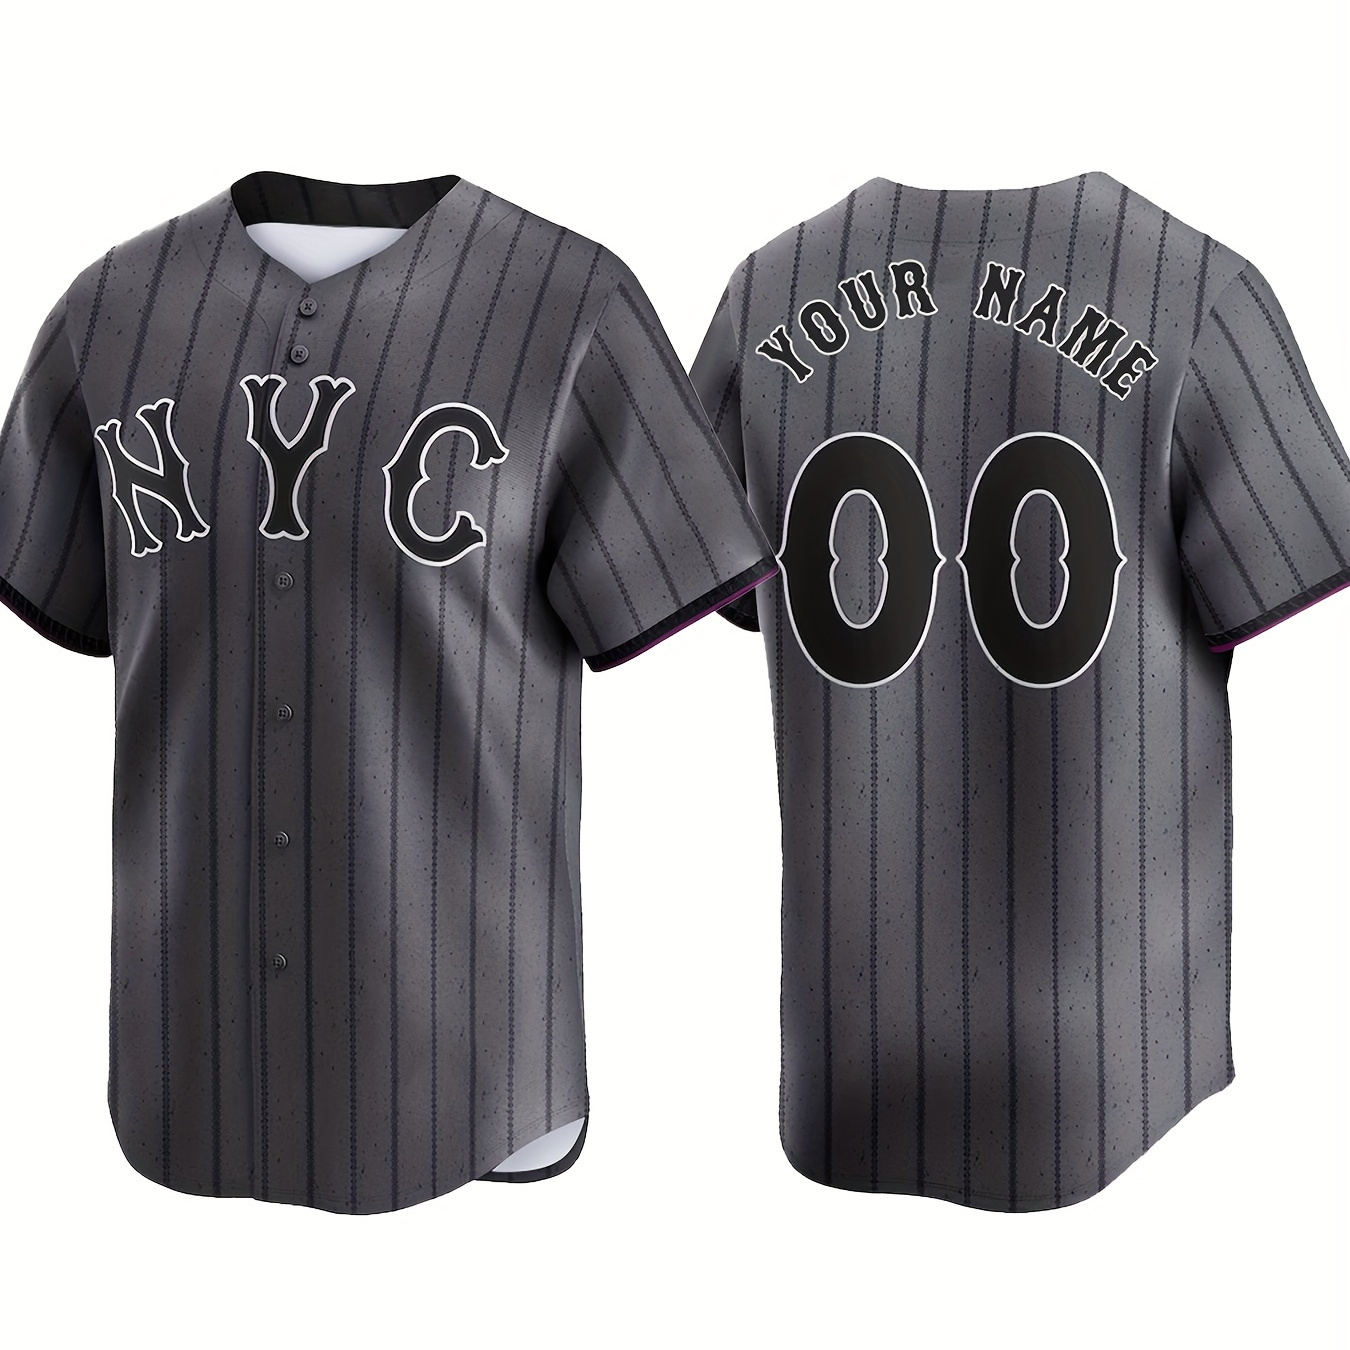 

Customizable Name And Number Men's Baseball Jersey Embroidered Outdoor Daily Leisure Sports Customization S-3xl